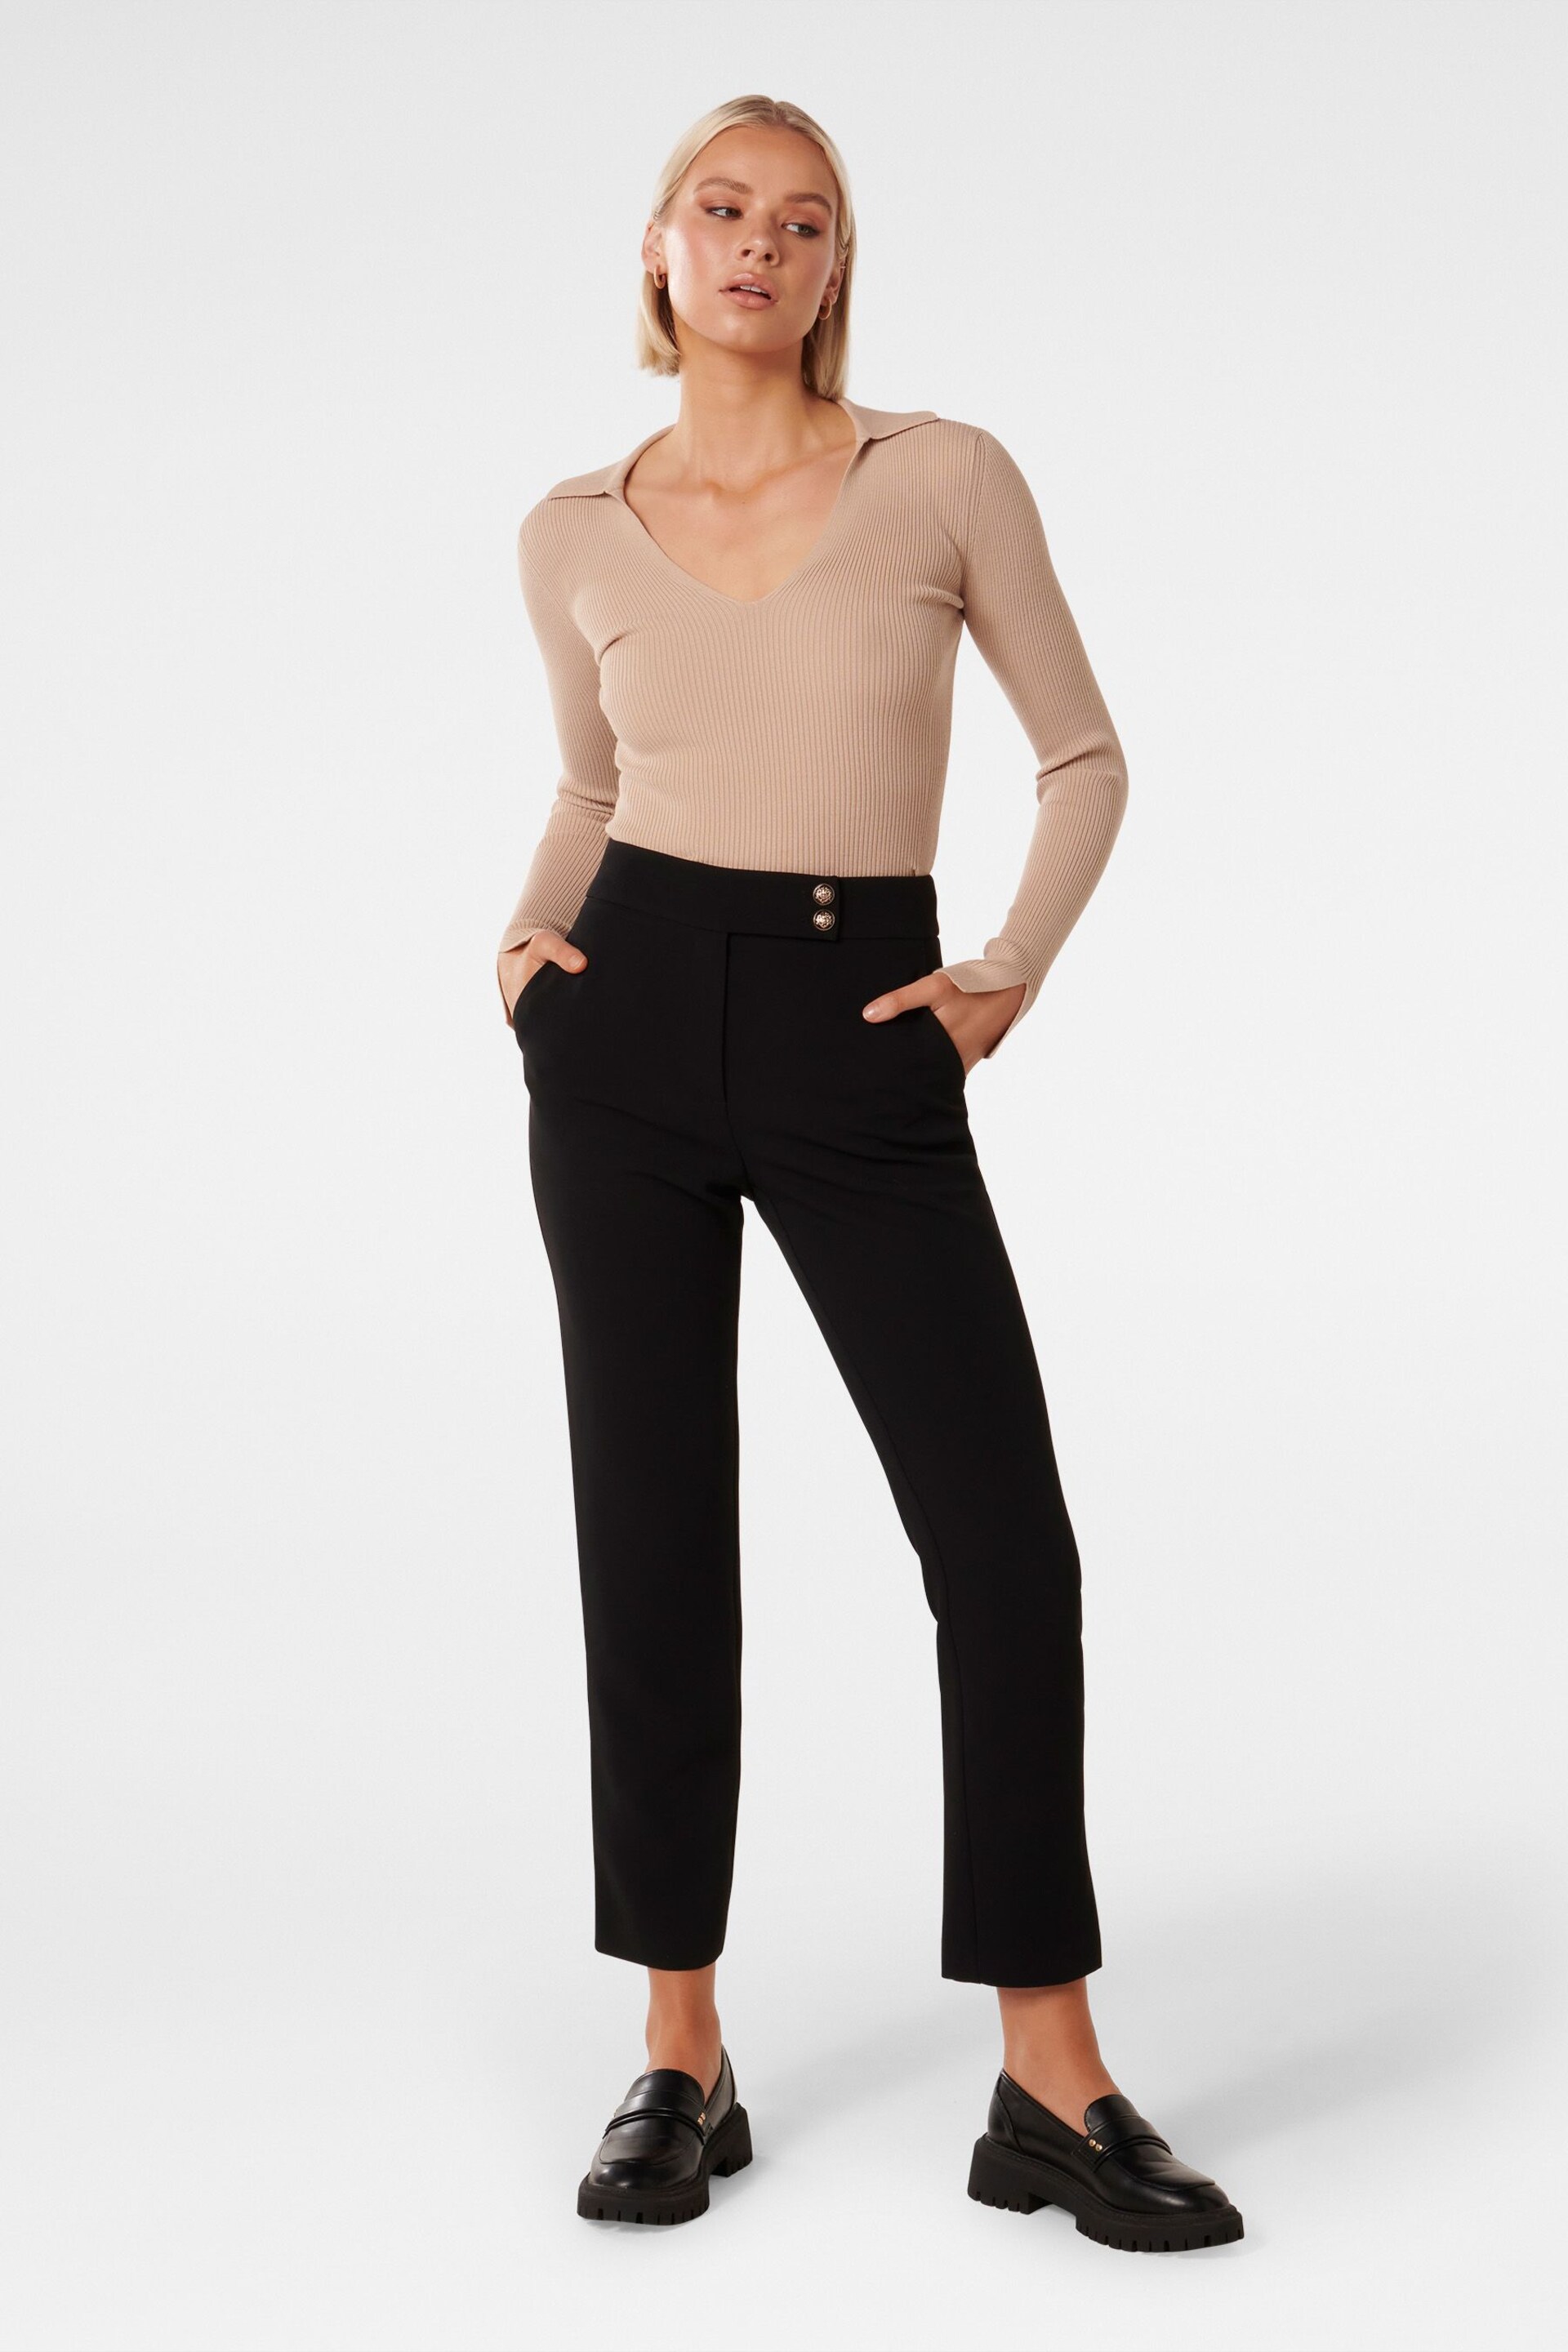 Forever New Black Kylie Button Cigarette Black Trousers - Image 4 of 5